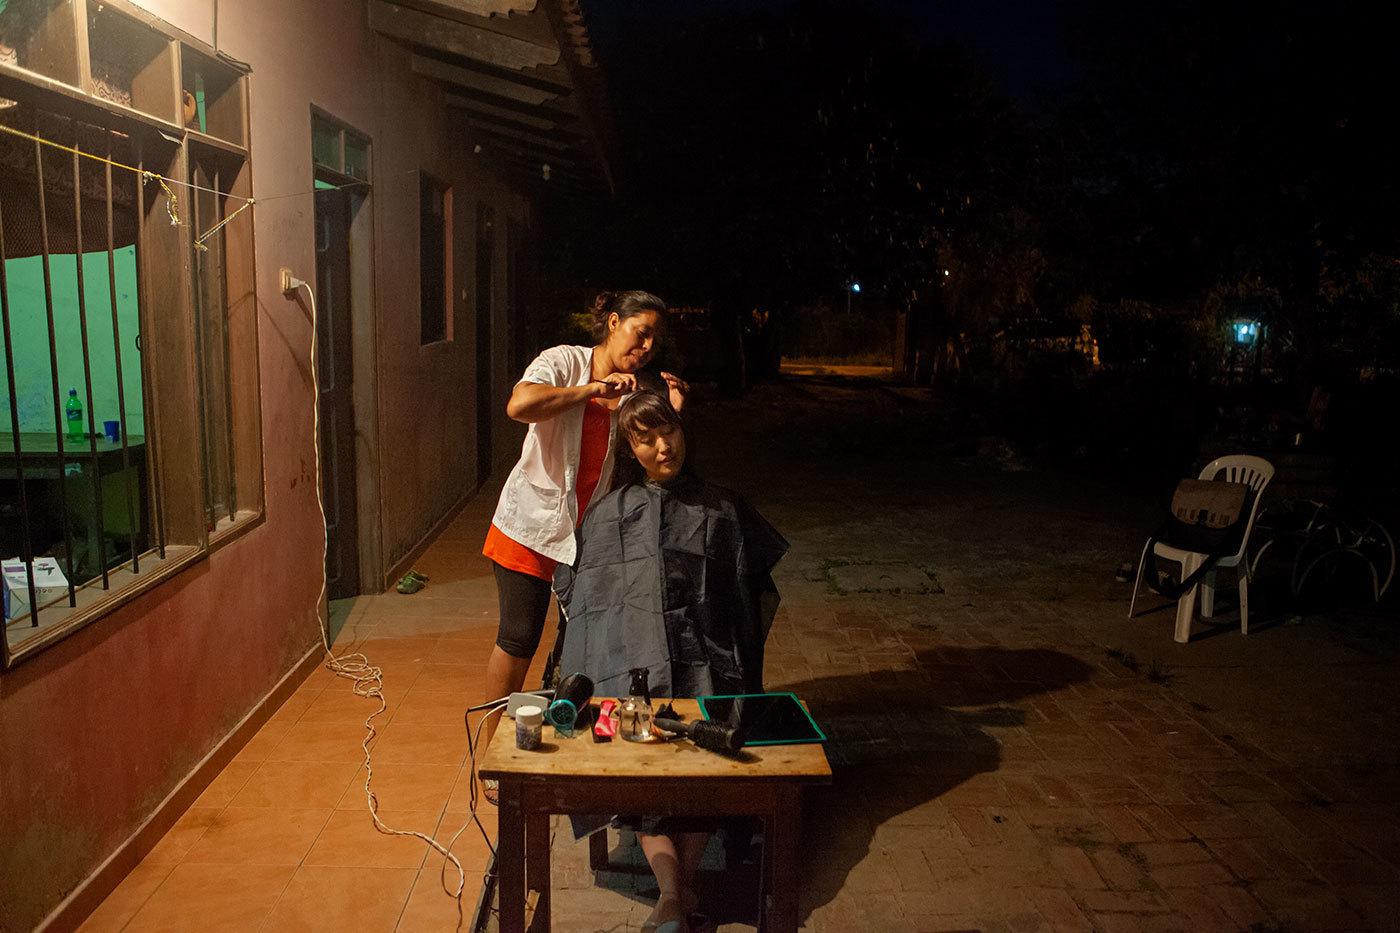 A Bolivian woman cuts another woman's hair outside her home at night